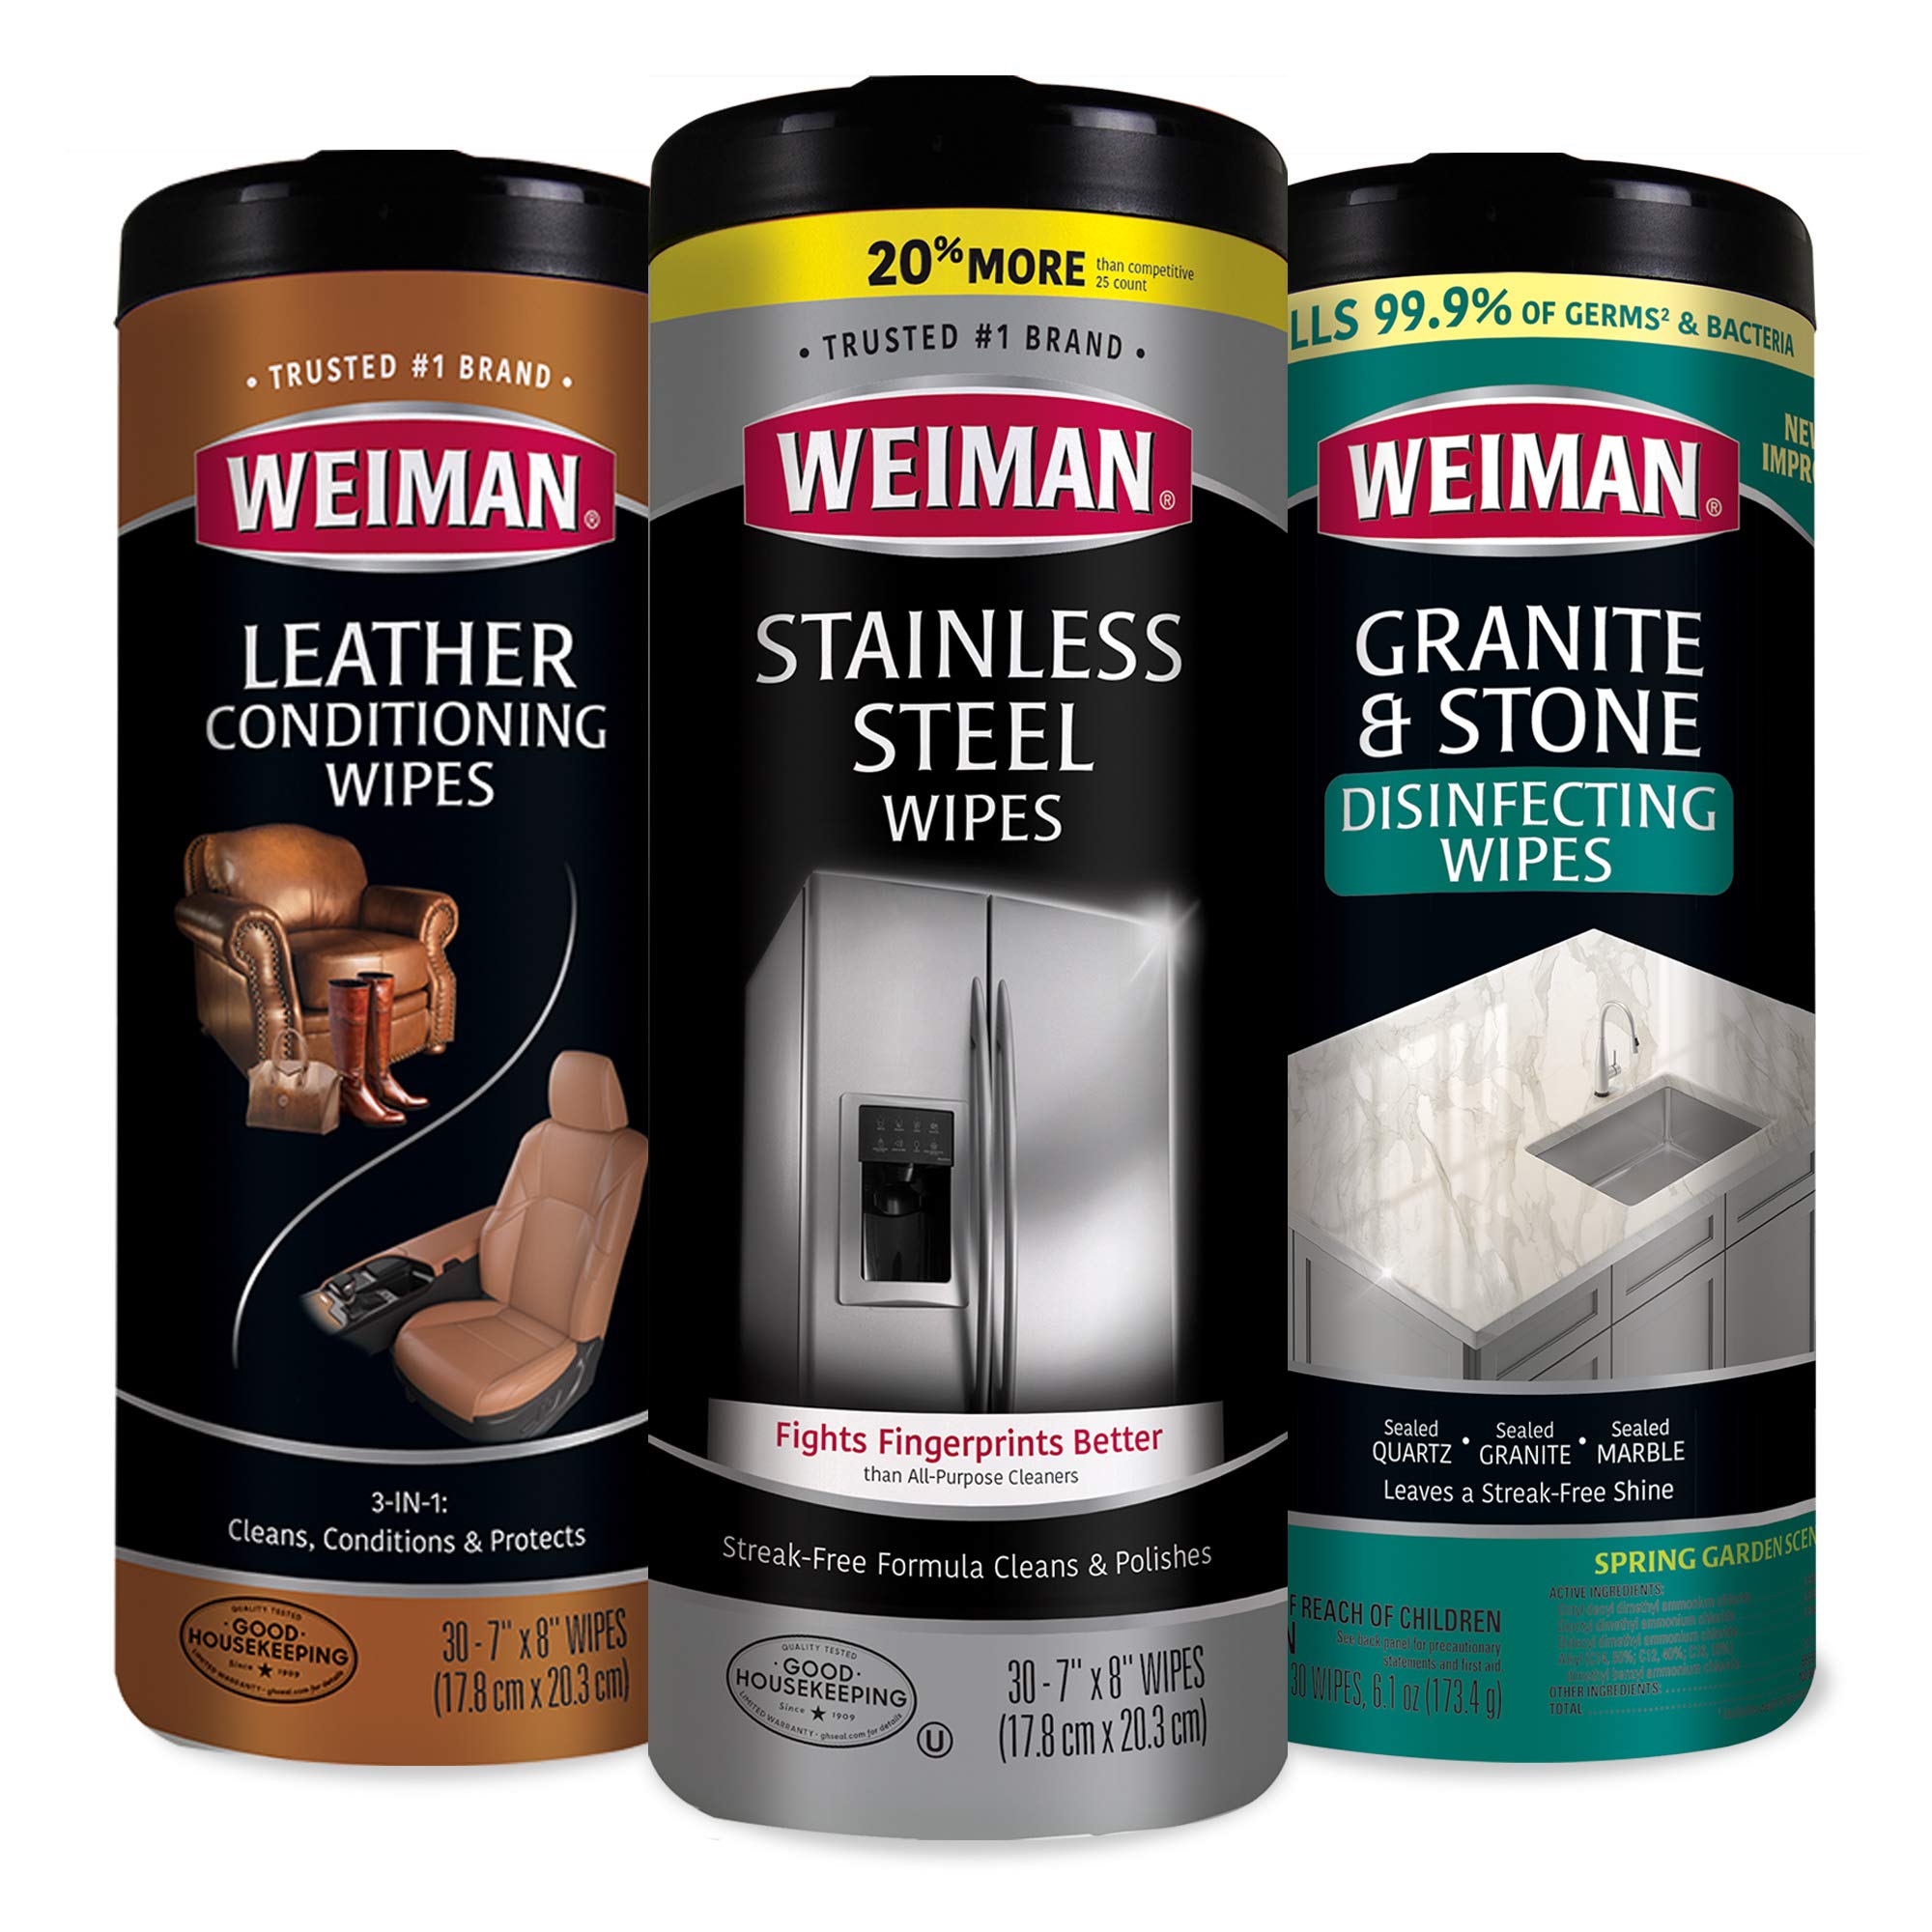 Weiman Wipes Variety 3 Pack - Stainless Steel, Leather, and